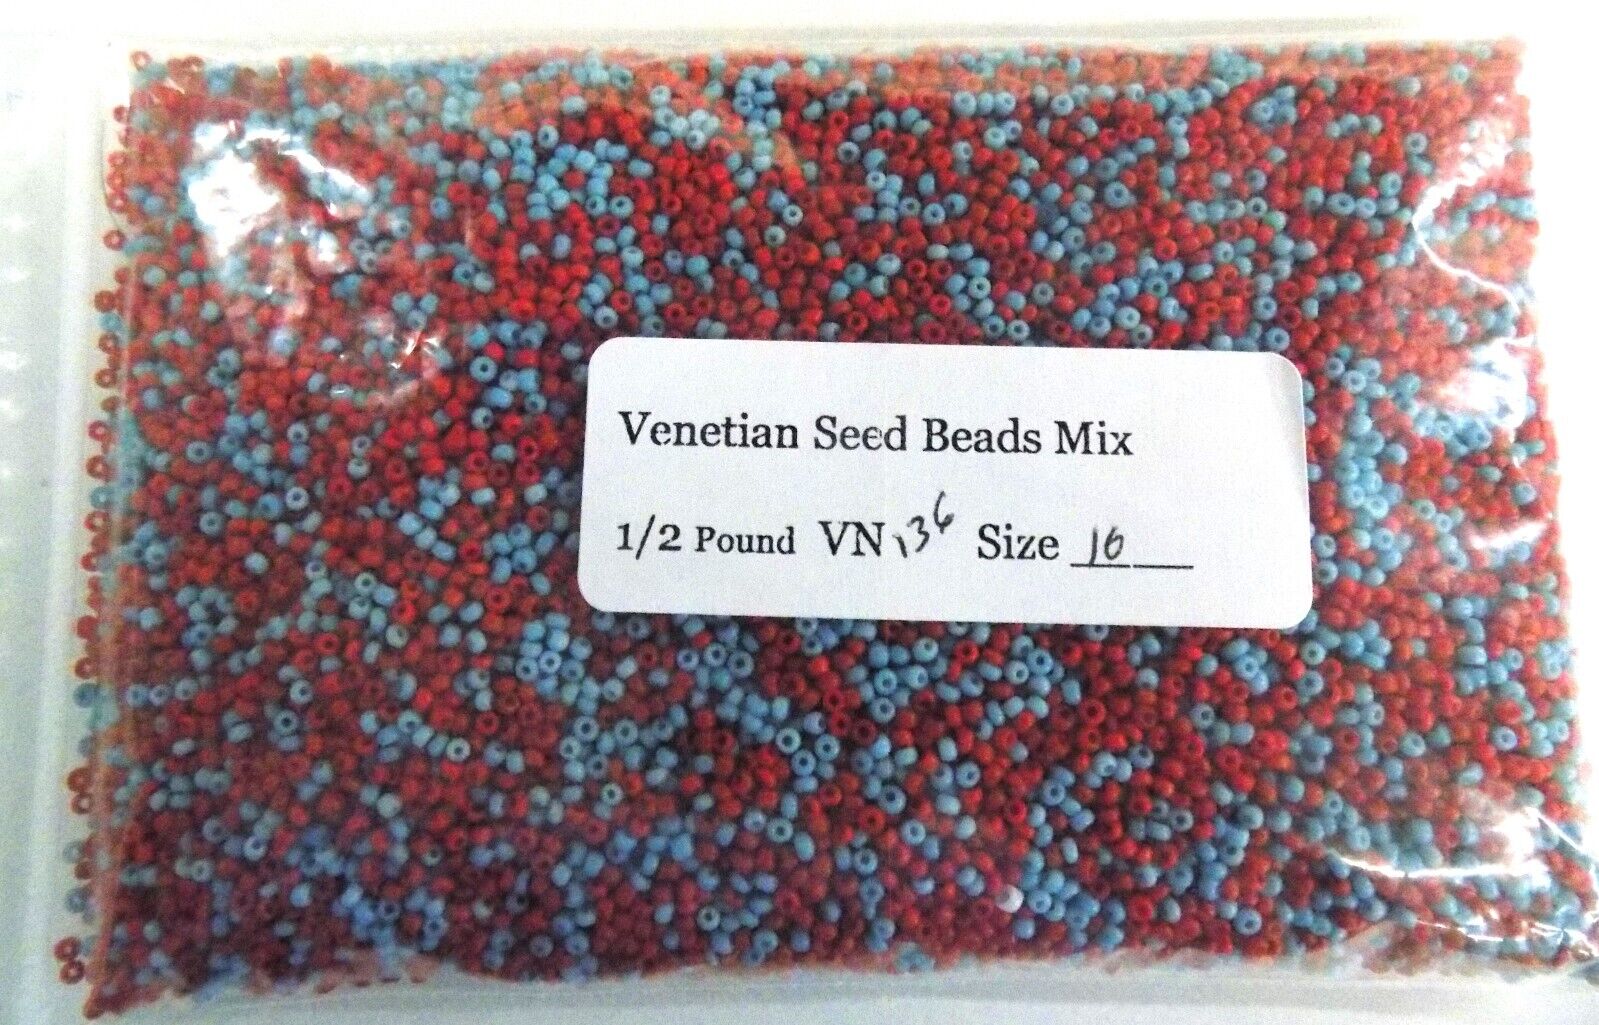 1/2# Pound Bulk Red Blue Mix Antique African Seed Beads Venetian Trade V136